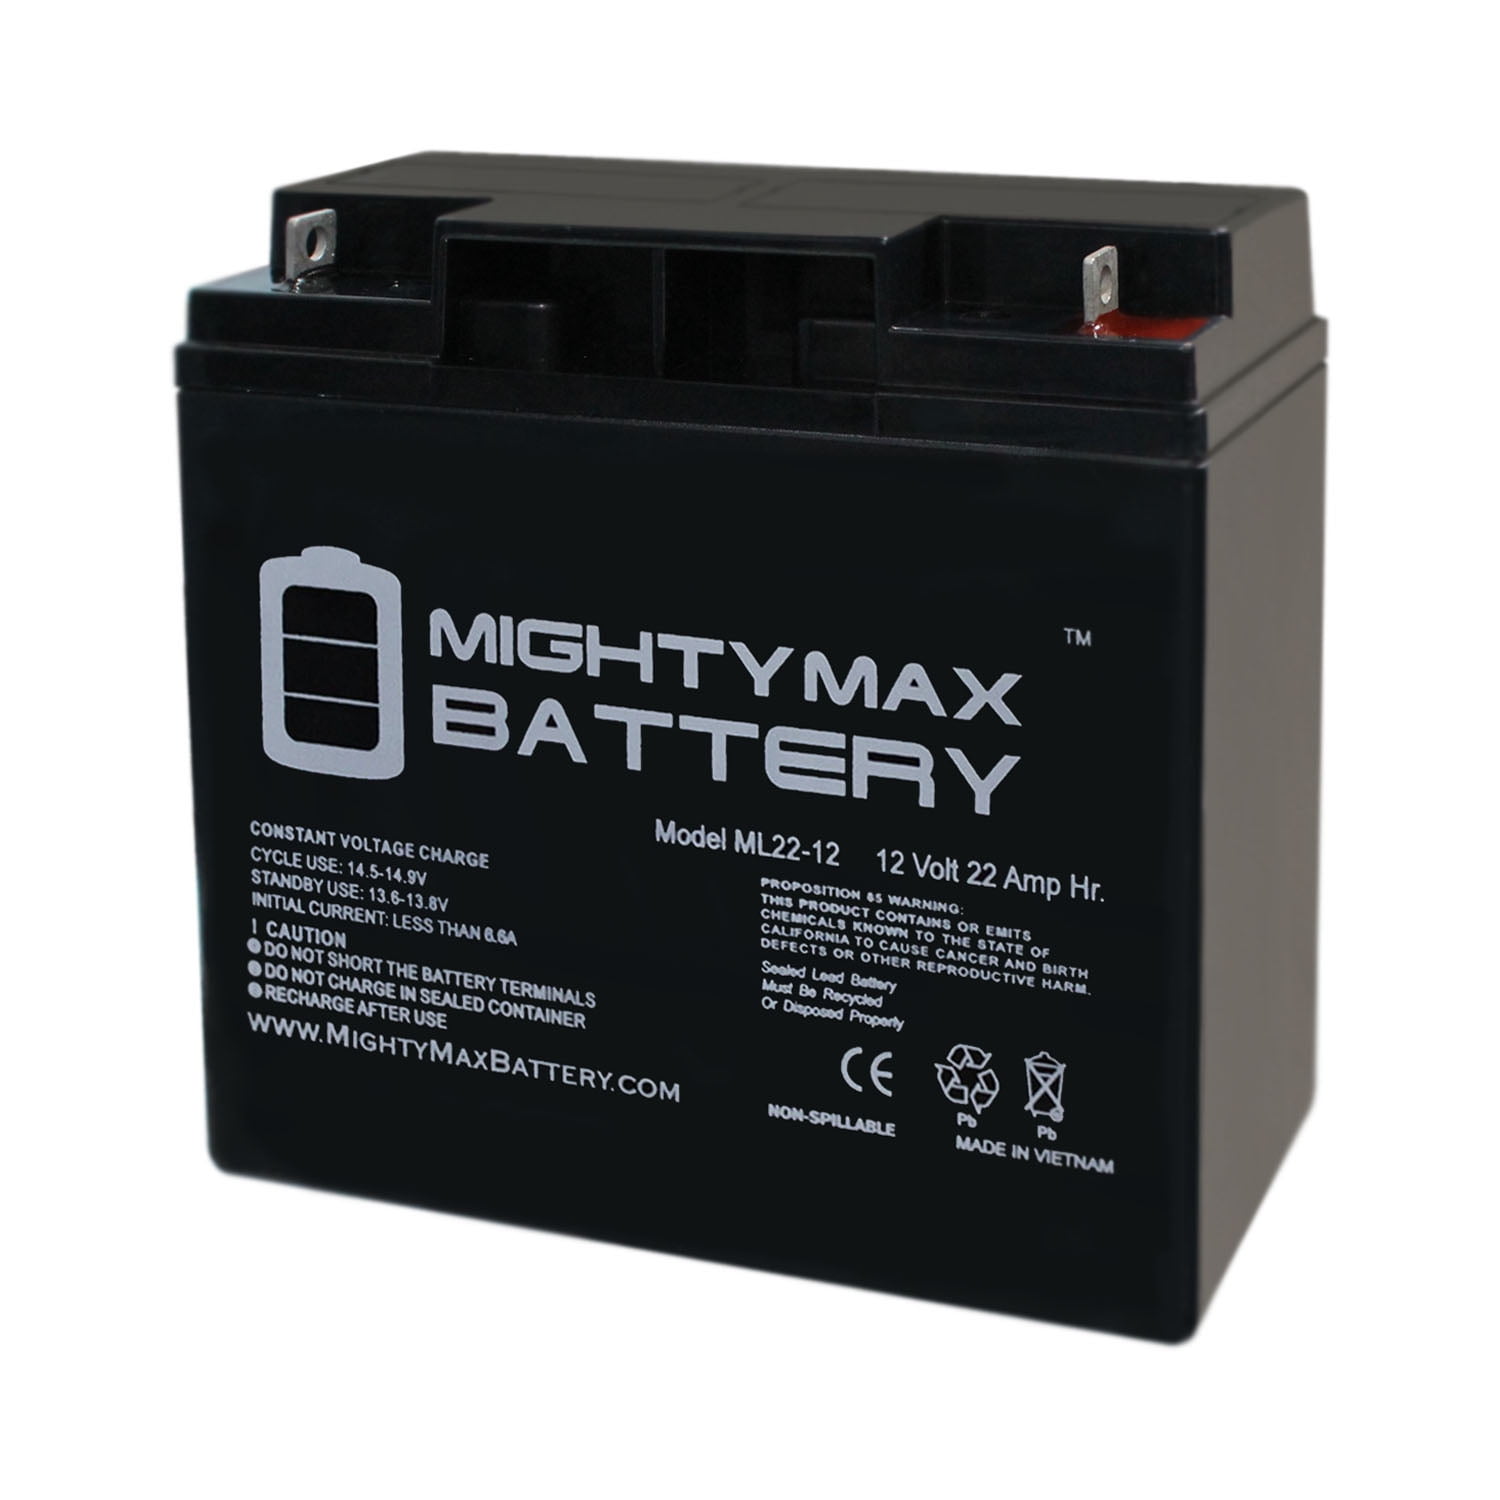 2 BATTERY UPGRADE for ZB-12-10 VMAX 12V 10AH SLA AGM Battery w/ T2 Terminals 